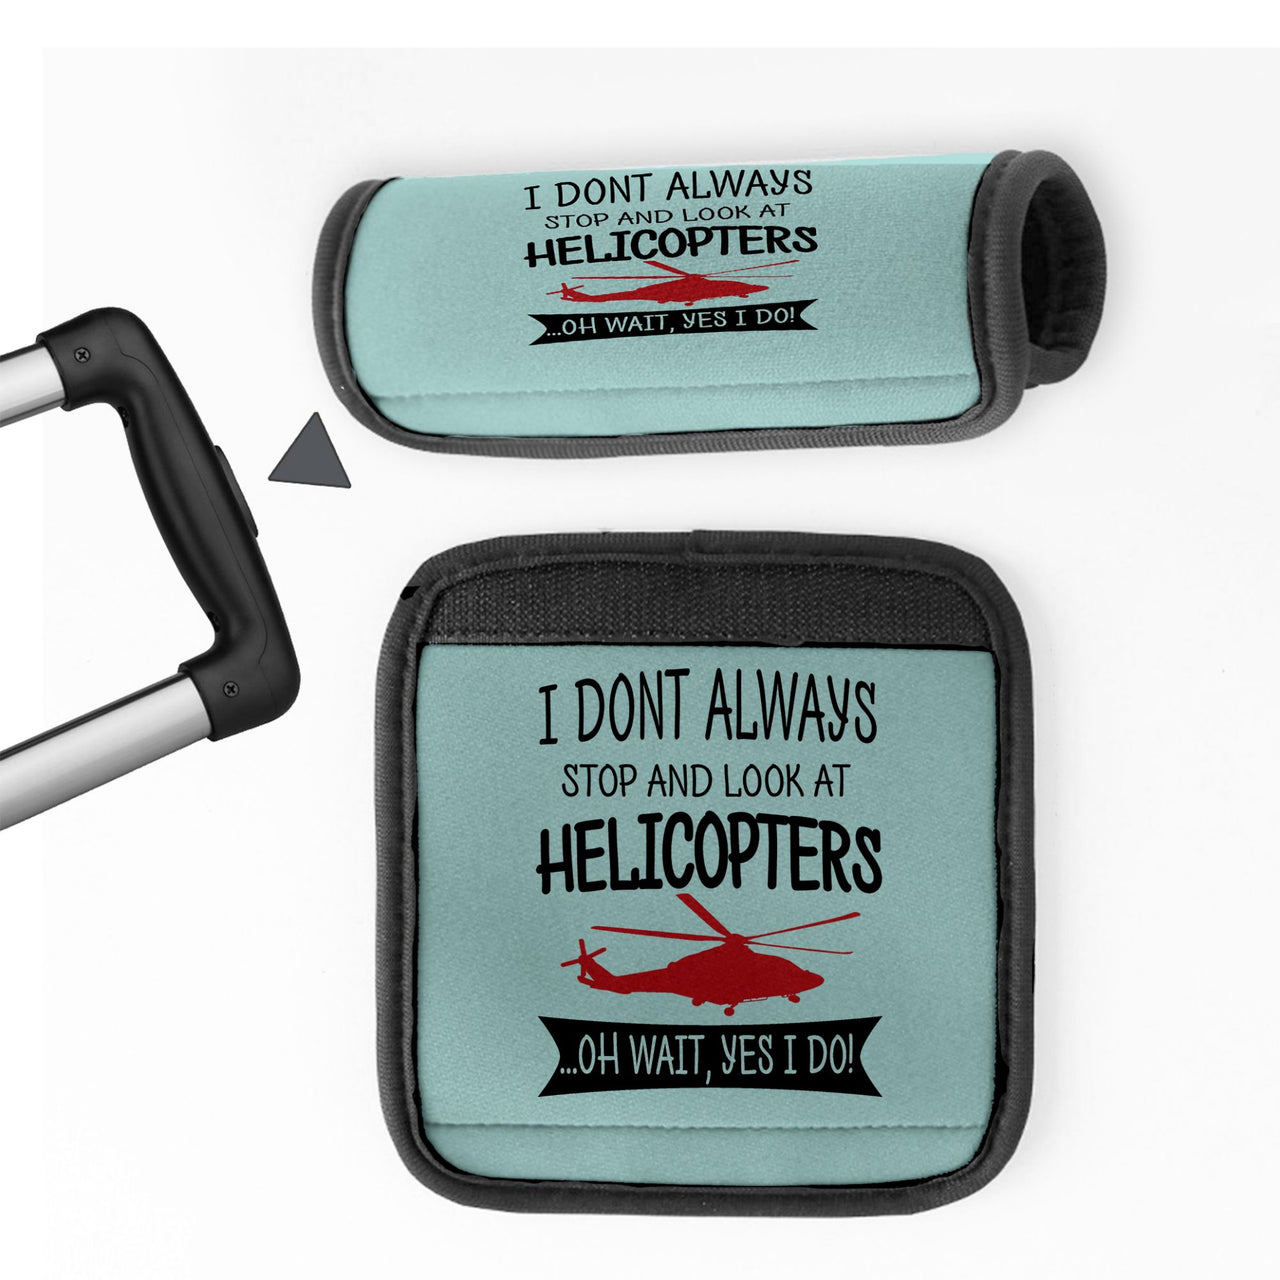 I Don't Always Stop and Look at Helicopters Designed Neoprene Luggage Handle Covers